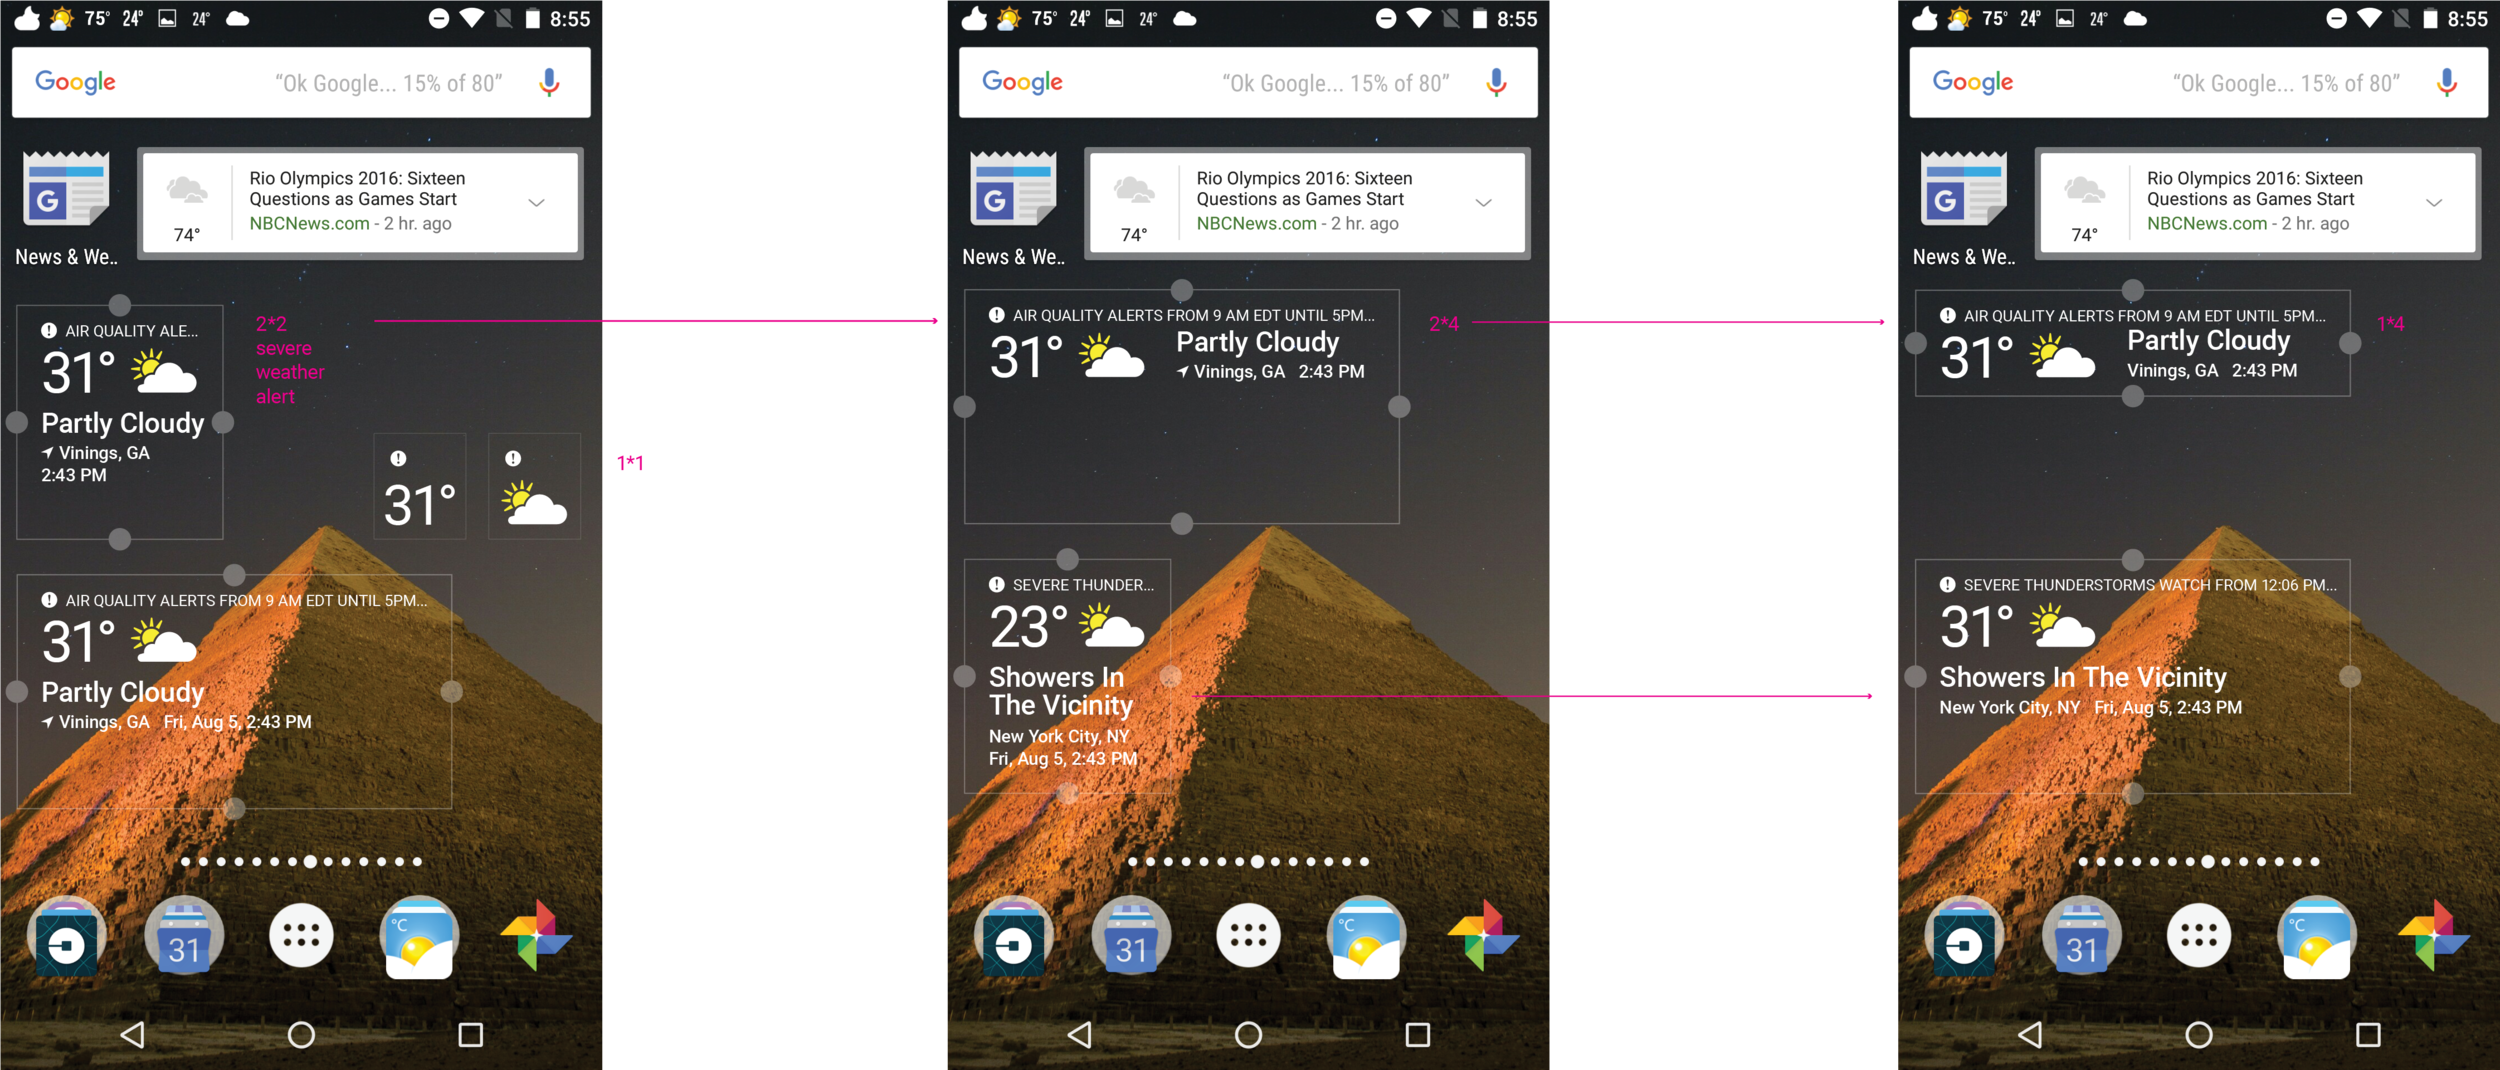 android_widget_v_3.1_severe_weather.png